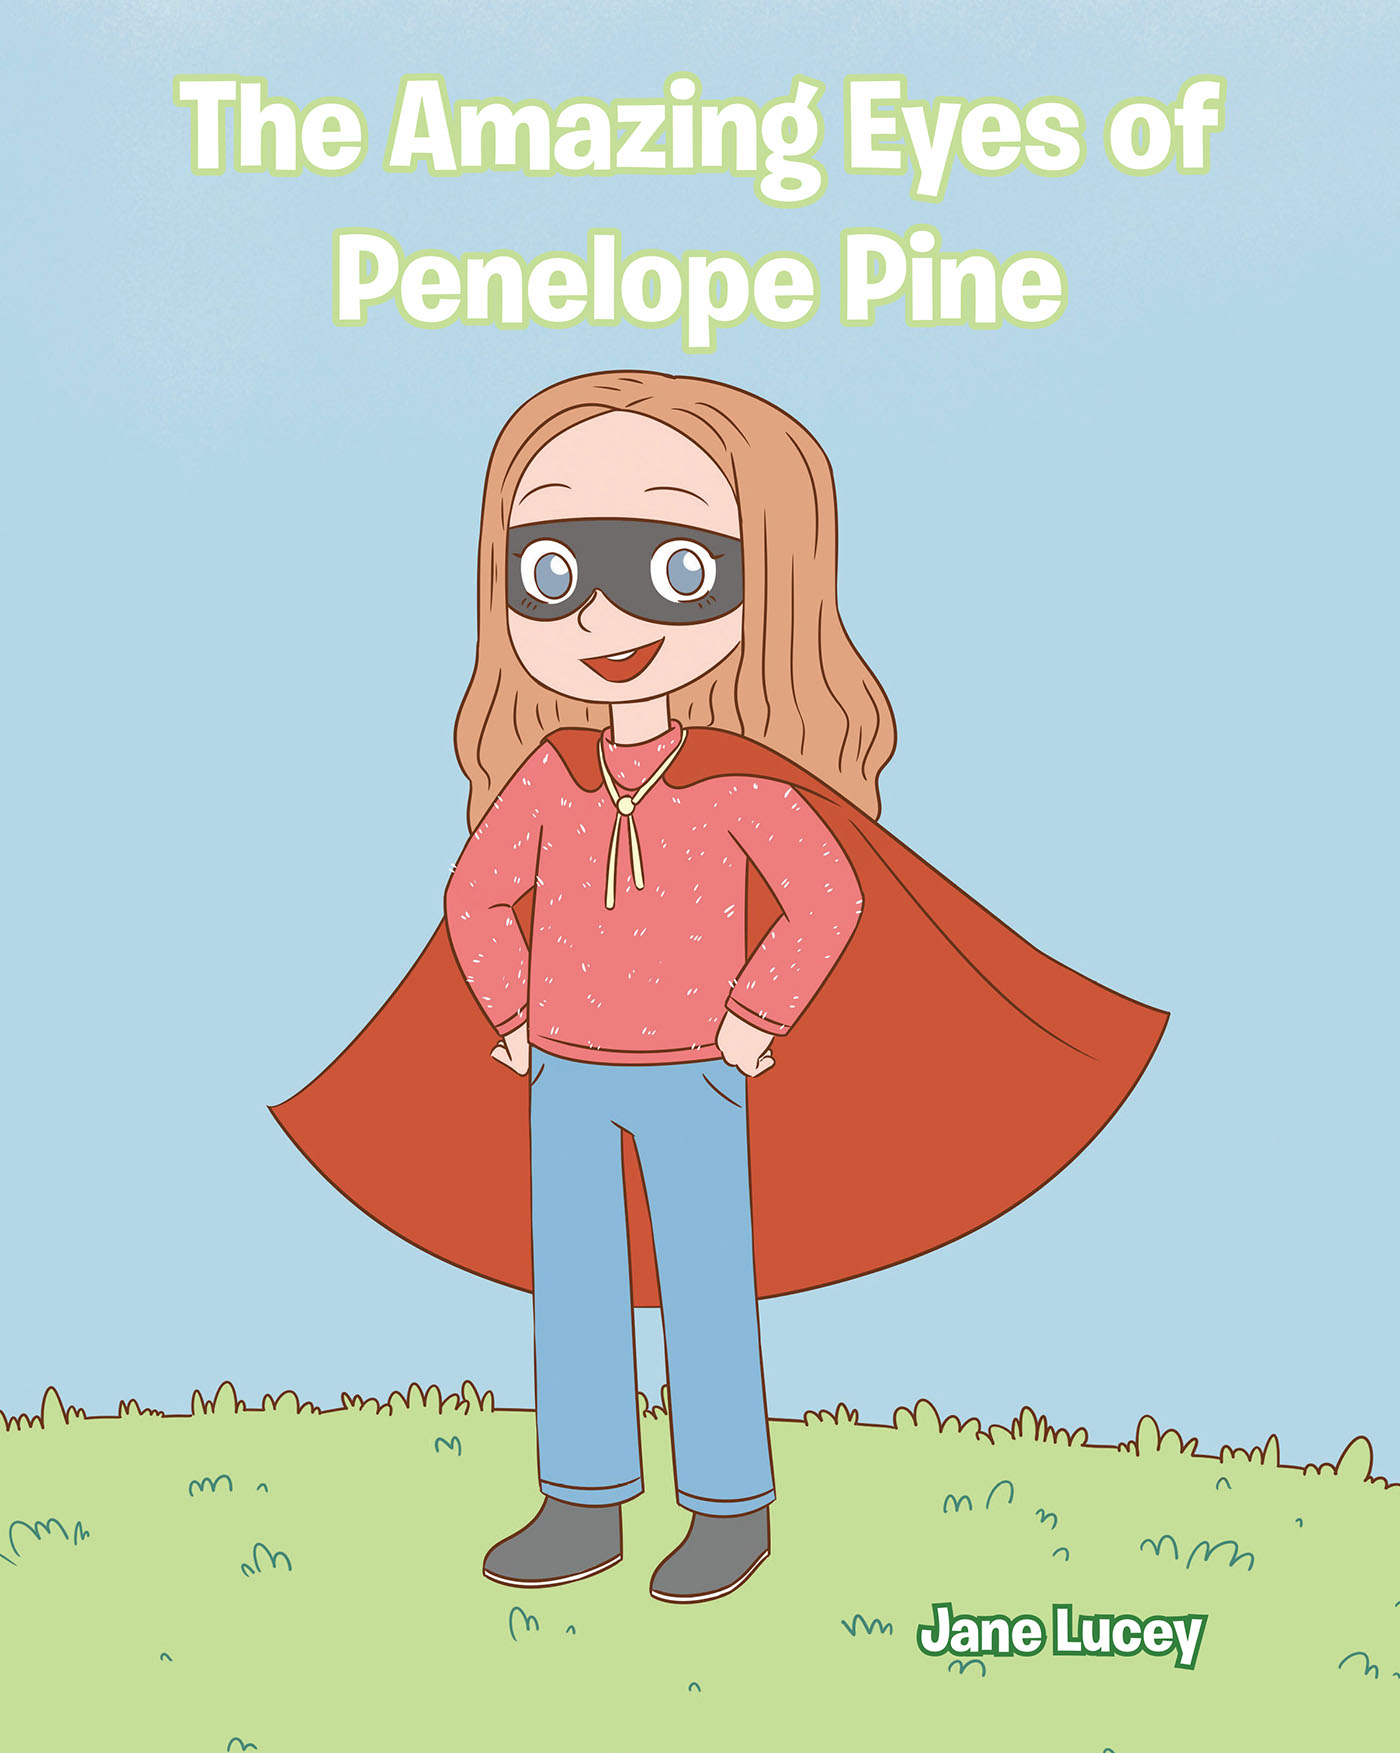 Jane Lucey’s Newly Released "The Amazing Eyes of Penelope Pine" is a Sweet Story of a Young Girl’s Search for Discovering a Hidden Talent